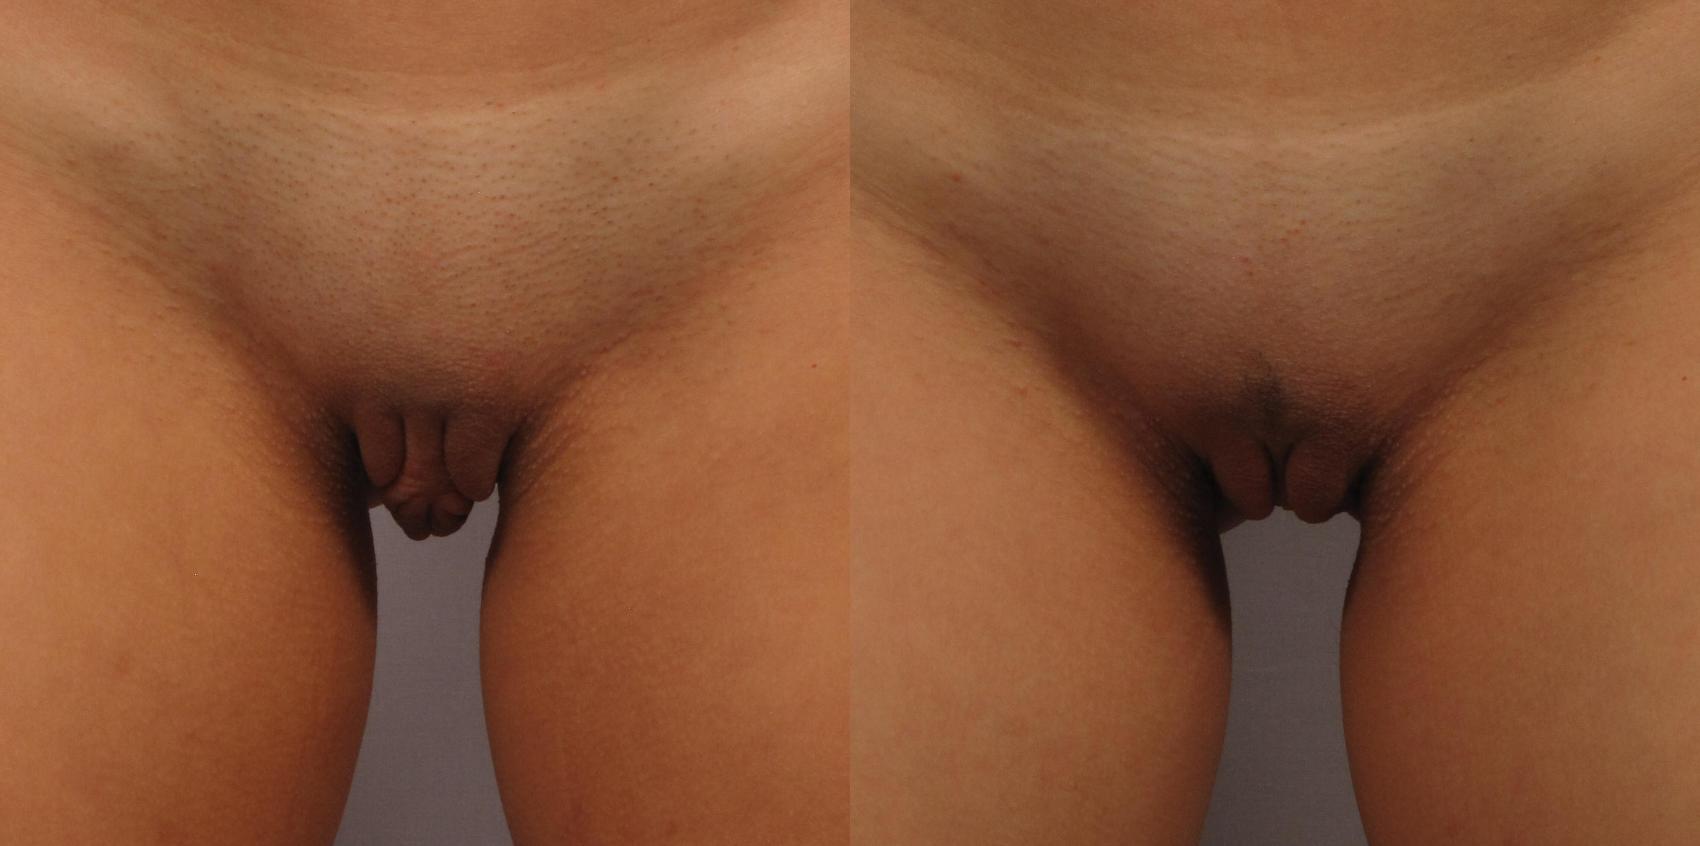 Labiaplasty patient standing frontal before surgery